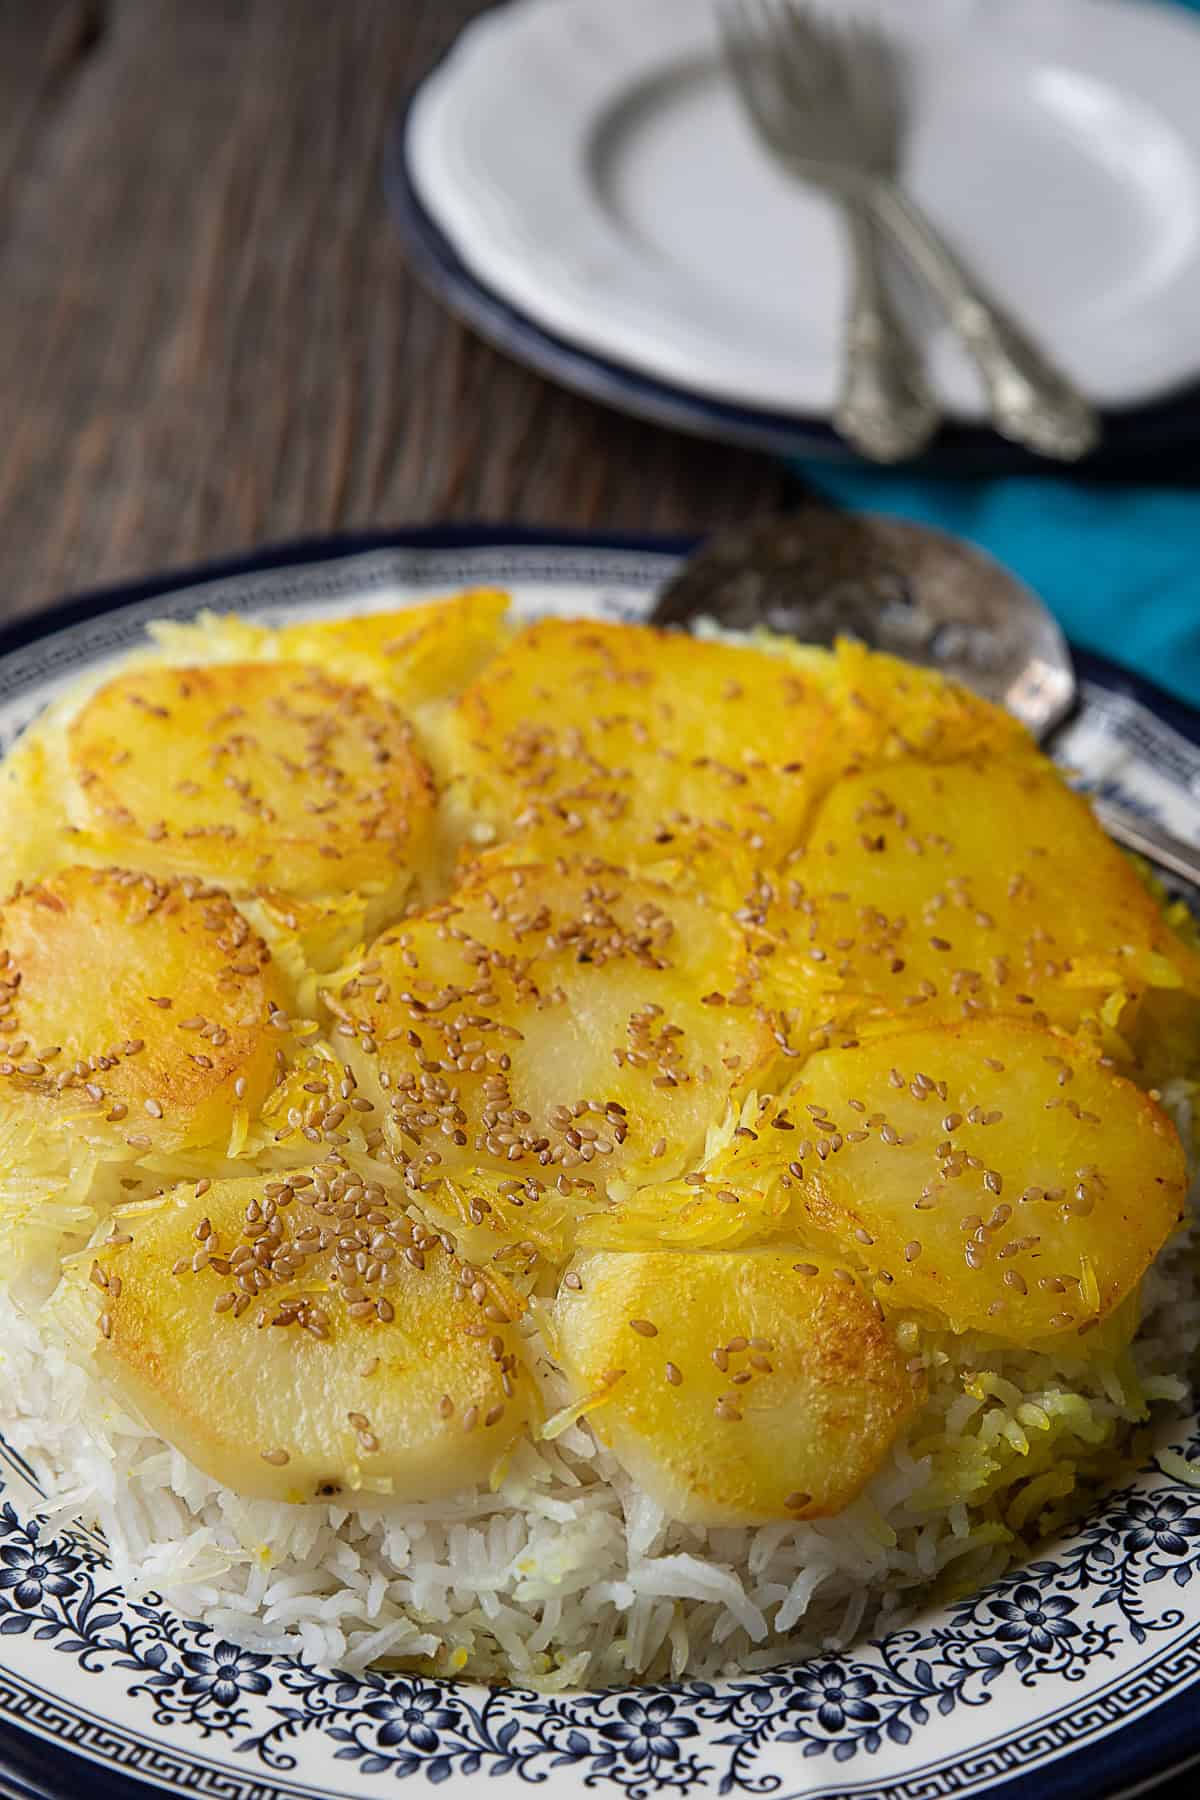 A close-up of Persian potato tahdig: Layers of thinly sliced golden potatoes forming a crispy crust over fragrant saffron-infused rice, served in a traditional Iranian pot.